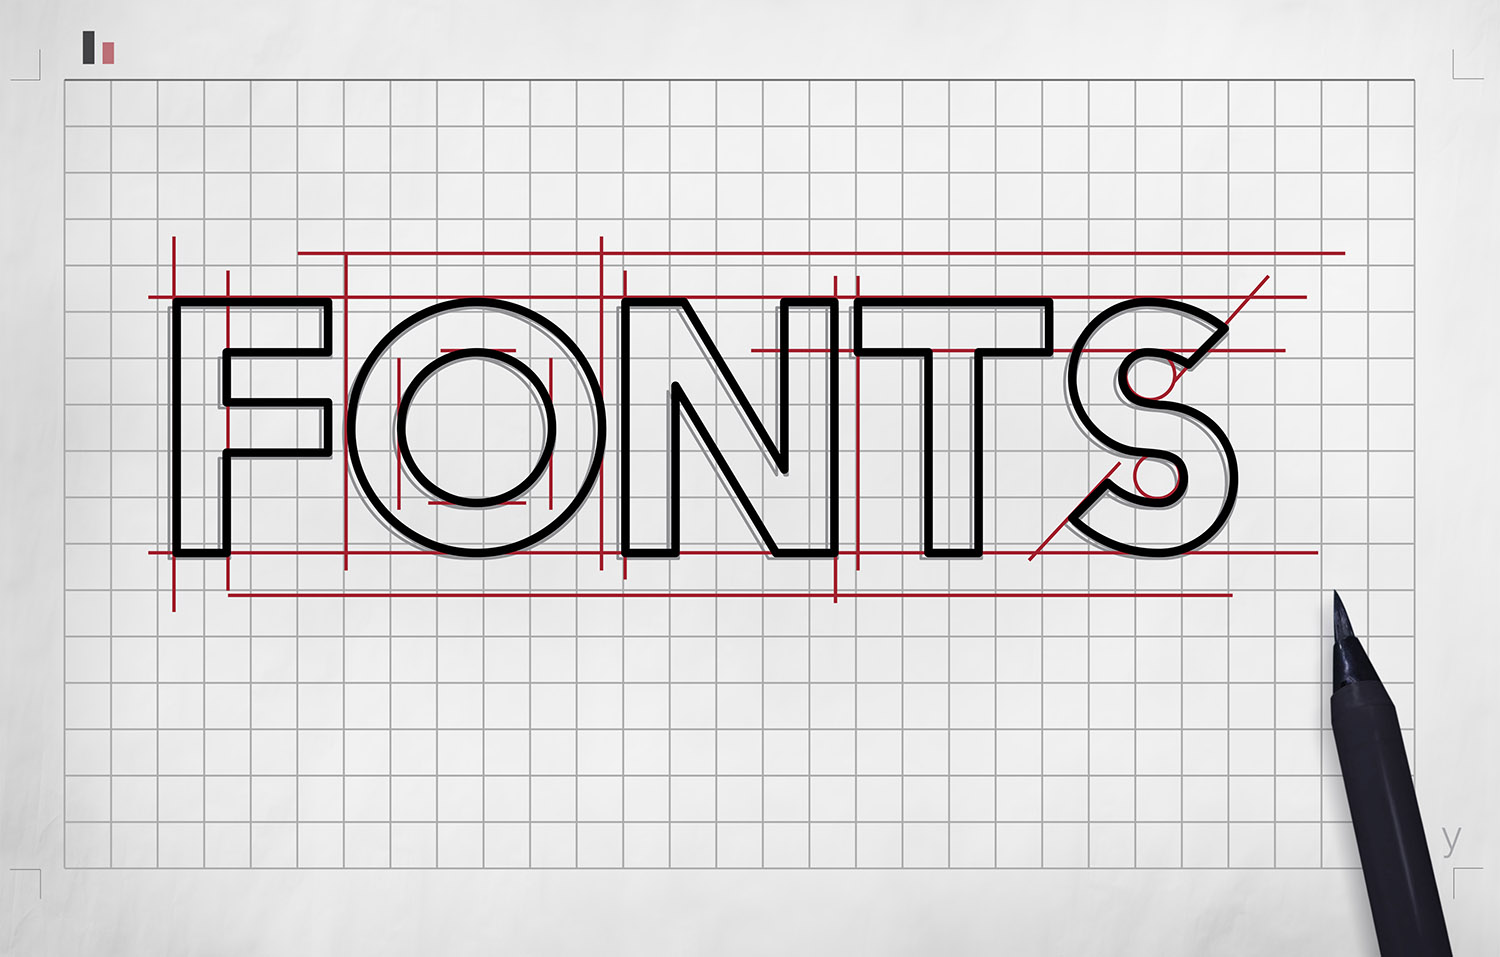 What are the elements of a font?